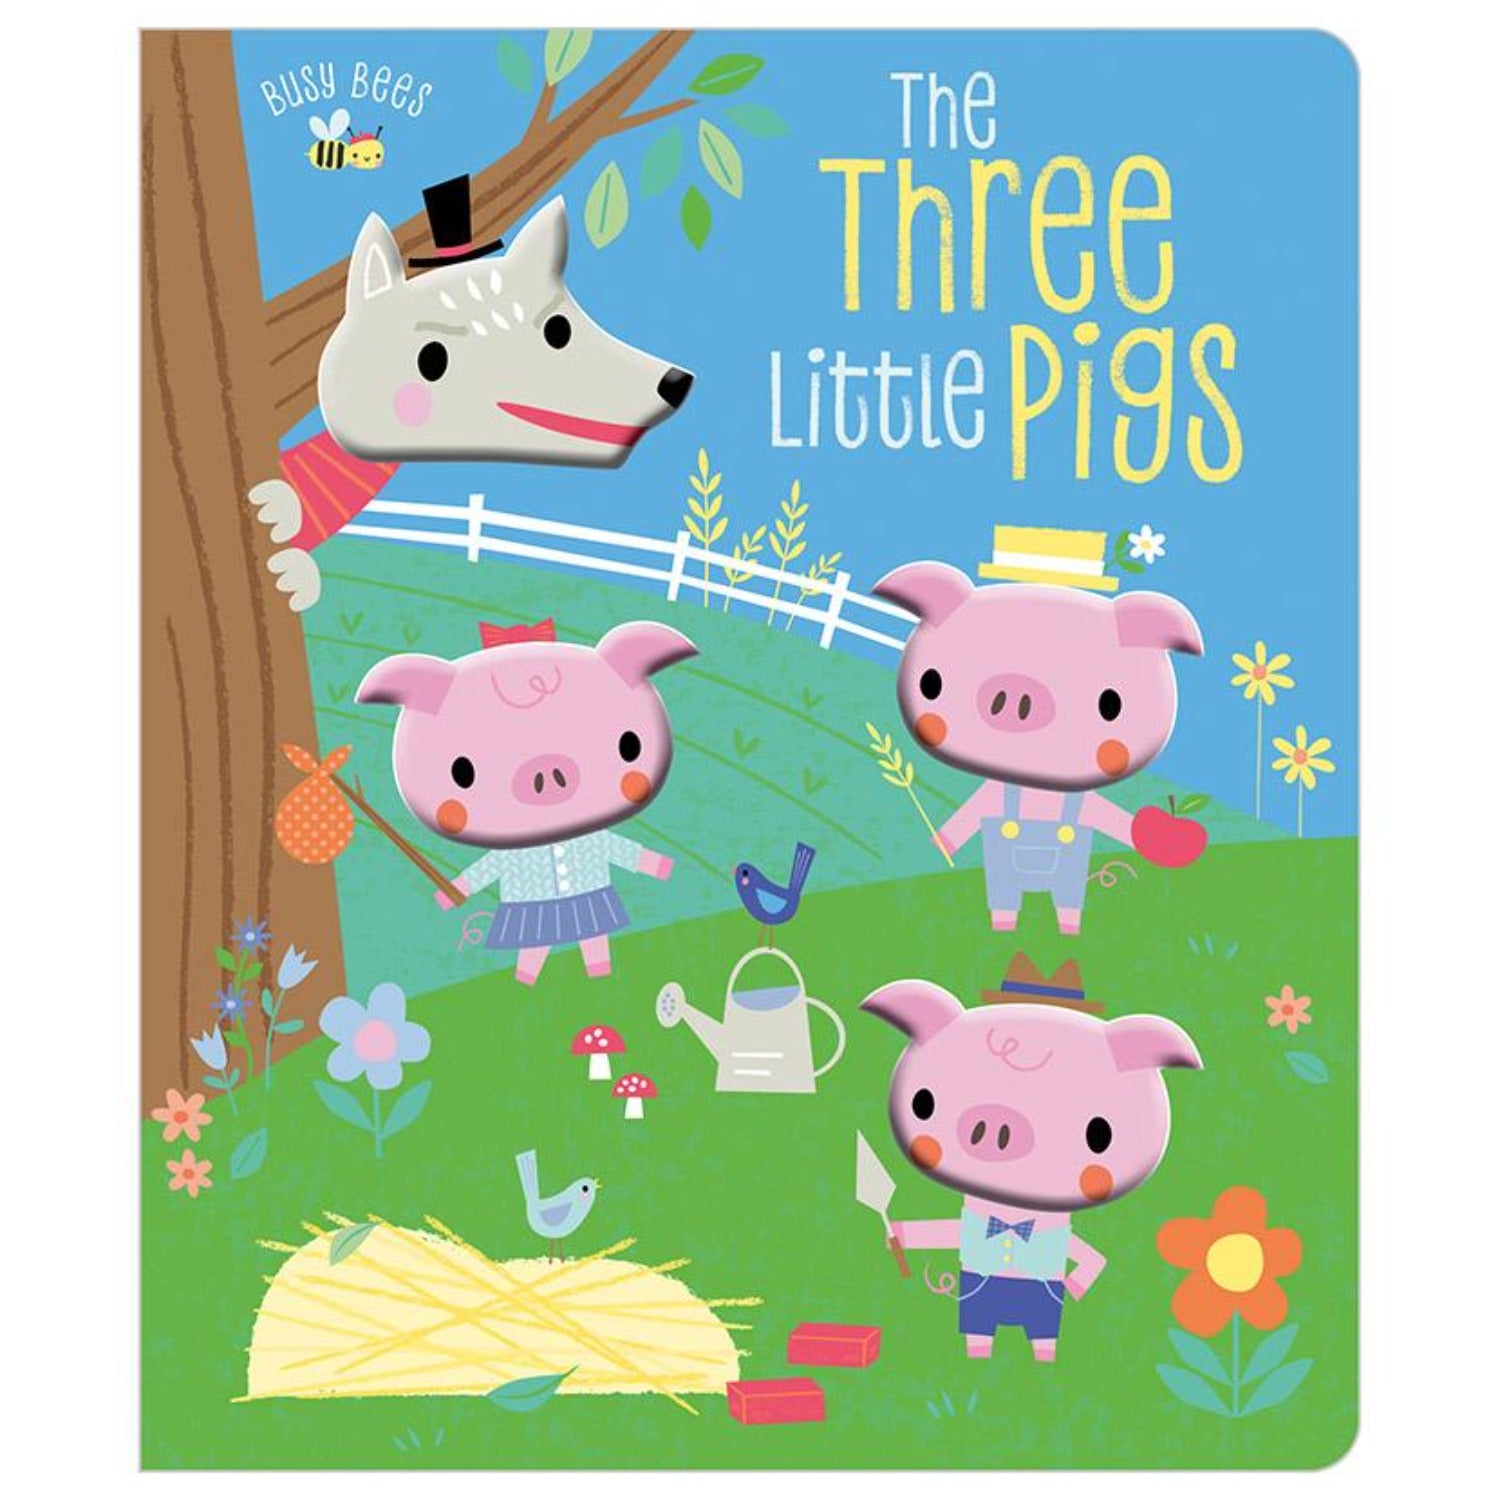 touch and feel three little pigs book aimed at newborns, babies and toddlers